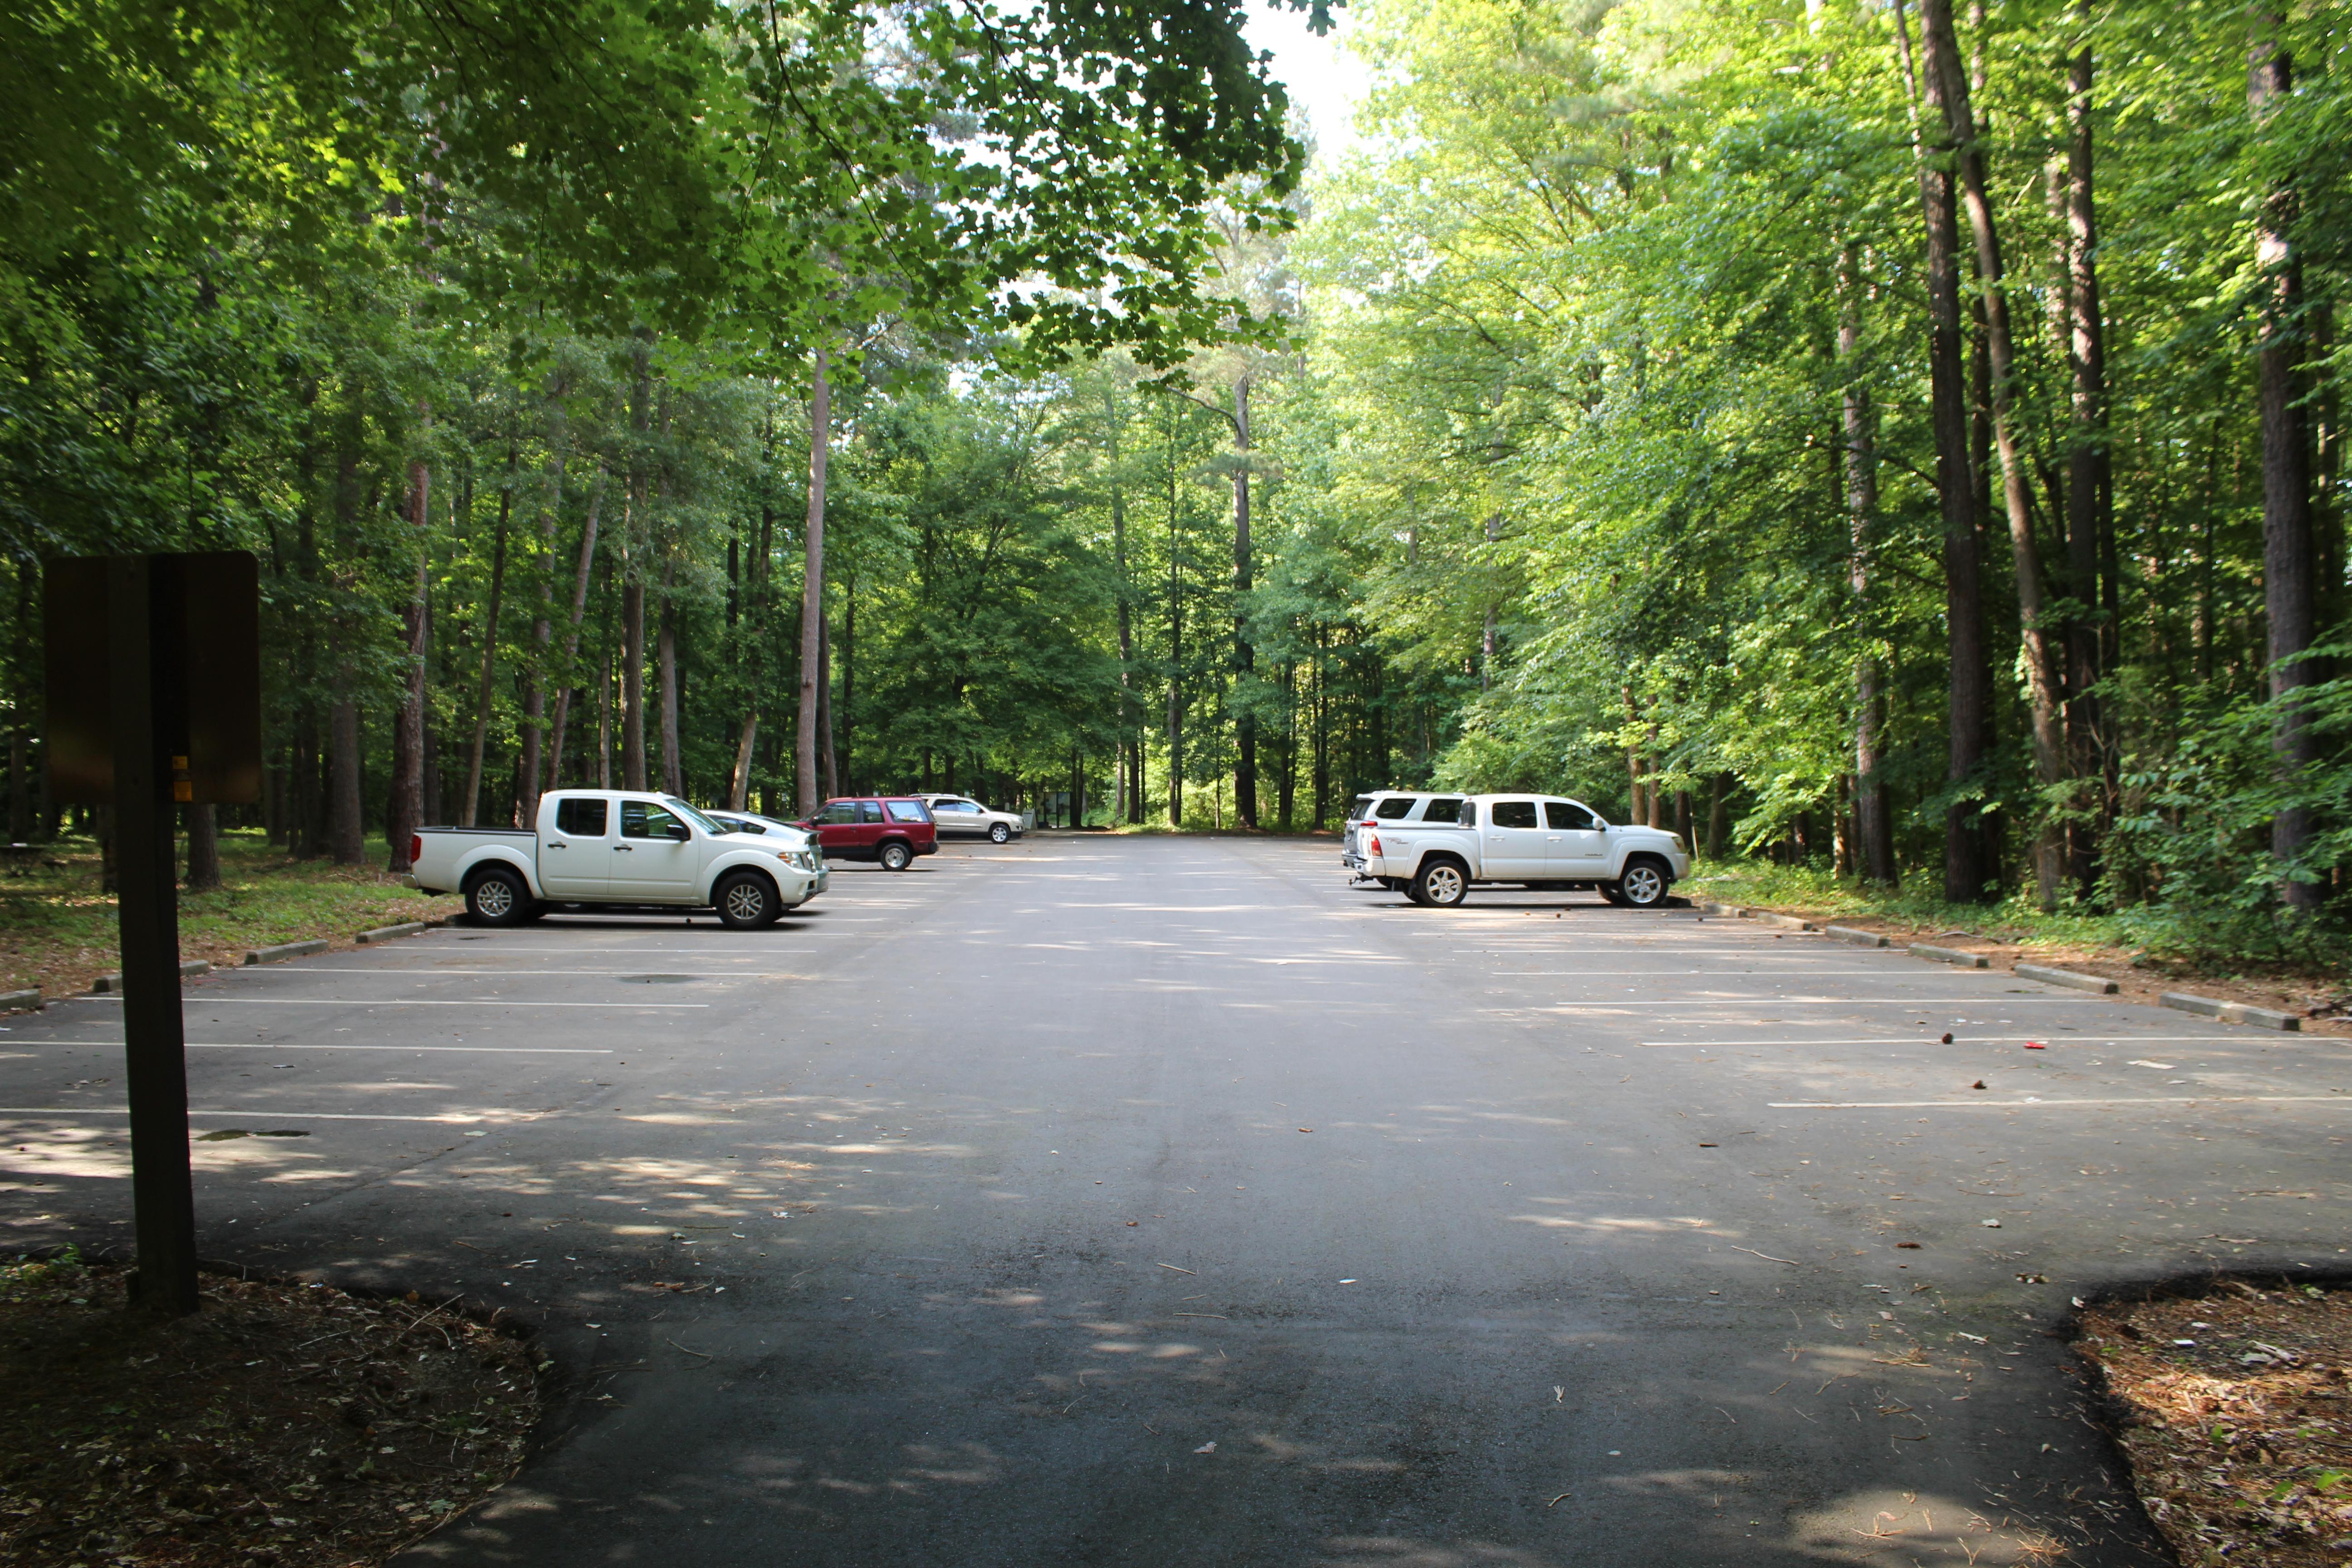 Paved parking lot with cars and trucks on either side in a grove of trees.